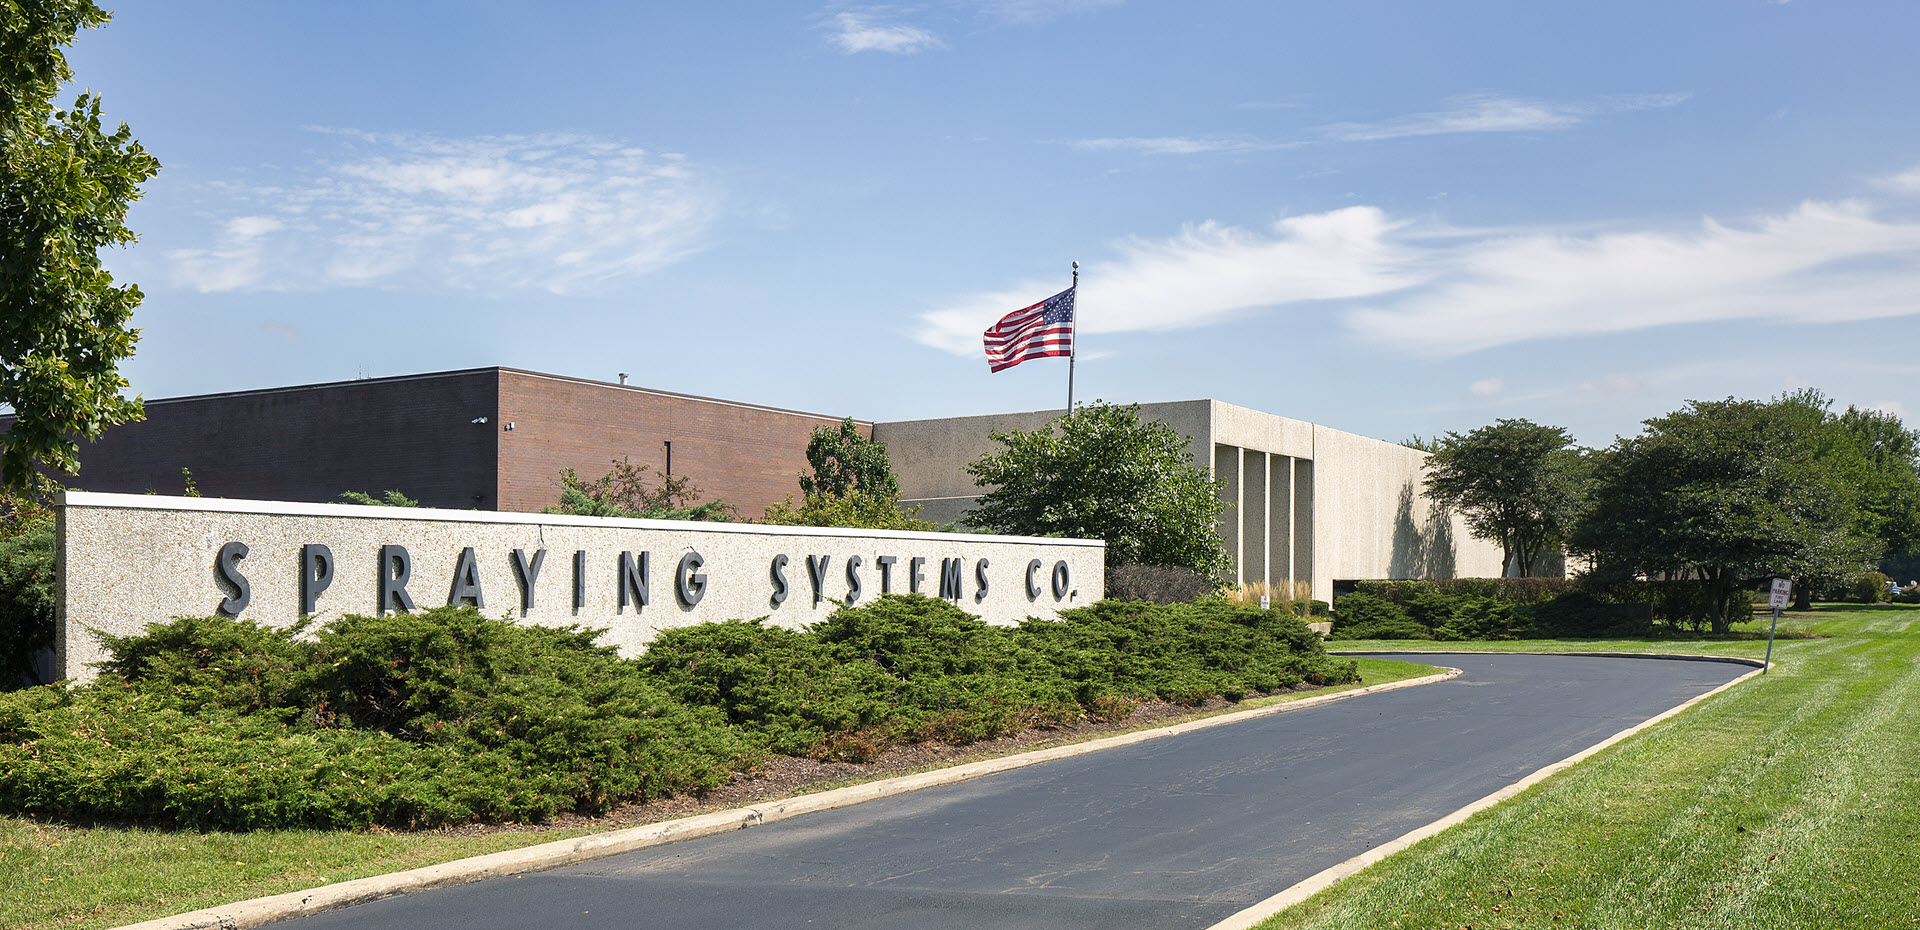 Spraying Systems Co. office building in Wheaton, IL